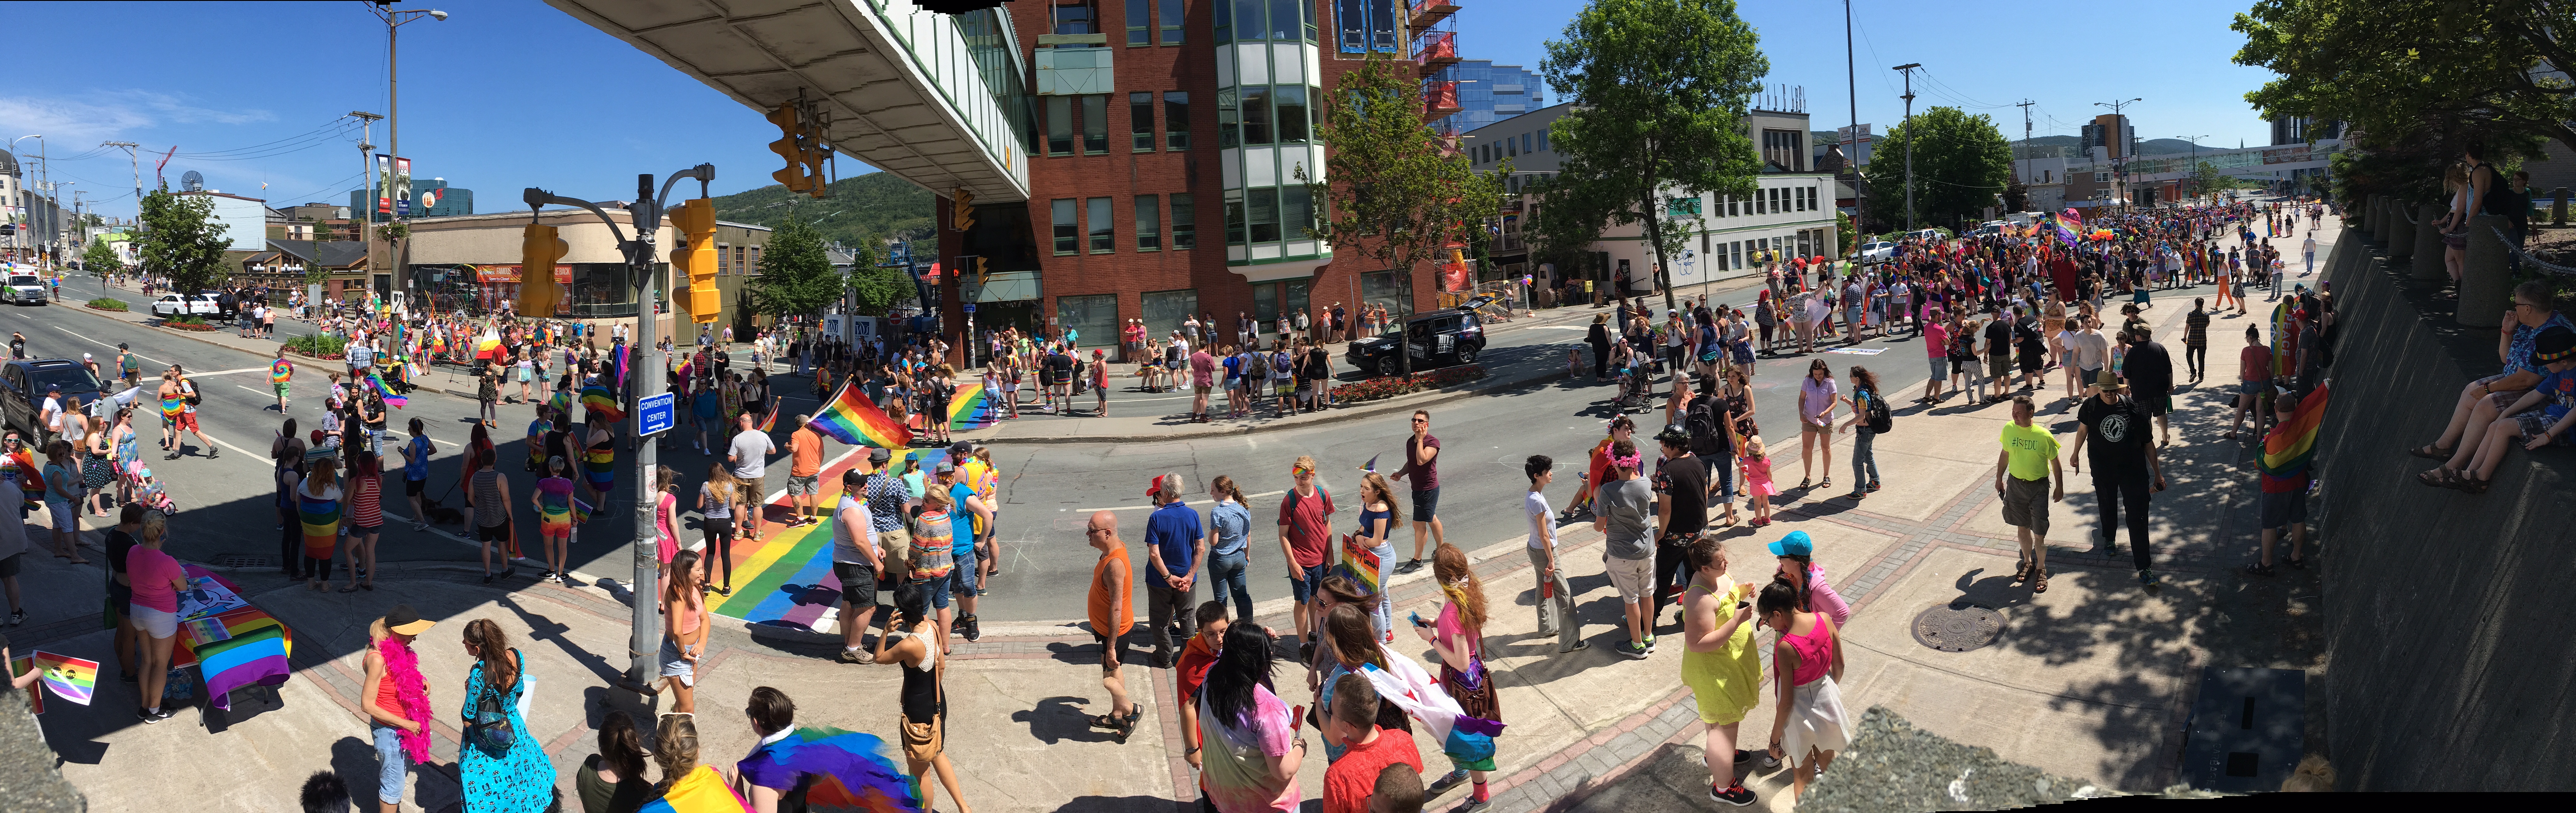 Everyone gets prepped to pass over the rainbow crosswalk that marks the beginning. - City Hall - New Gower street